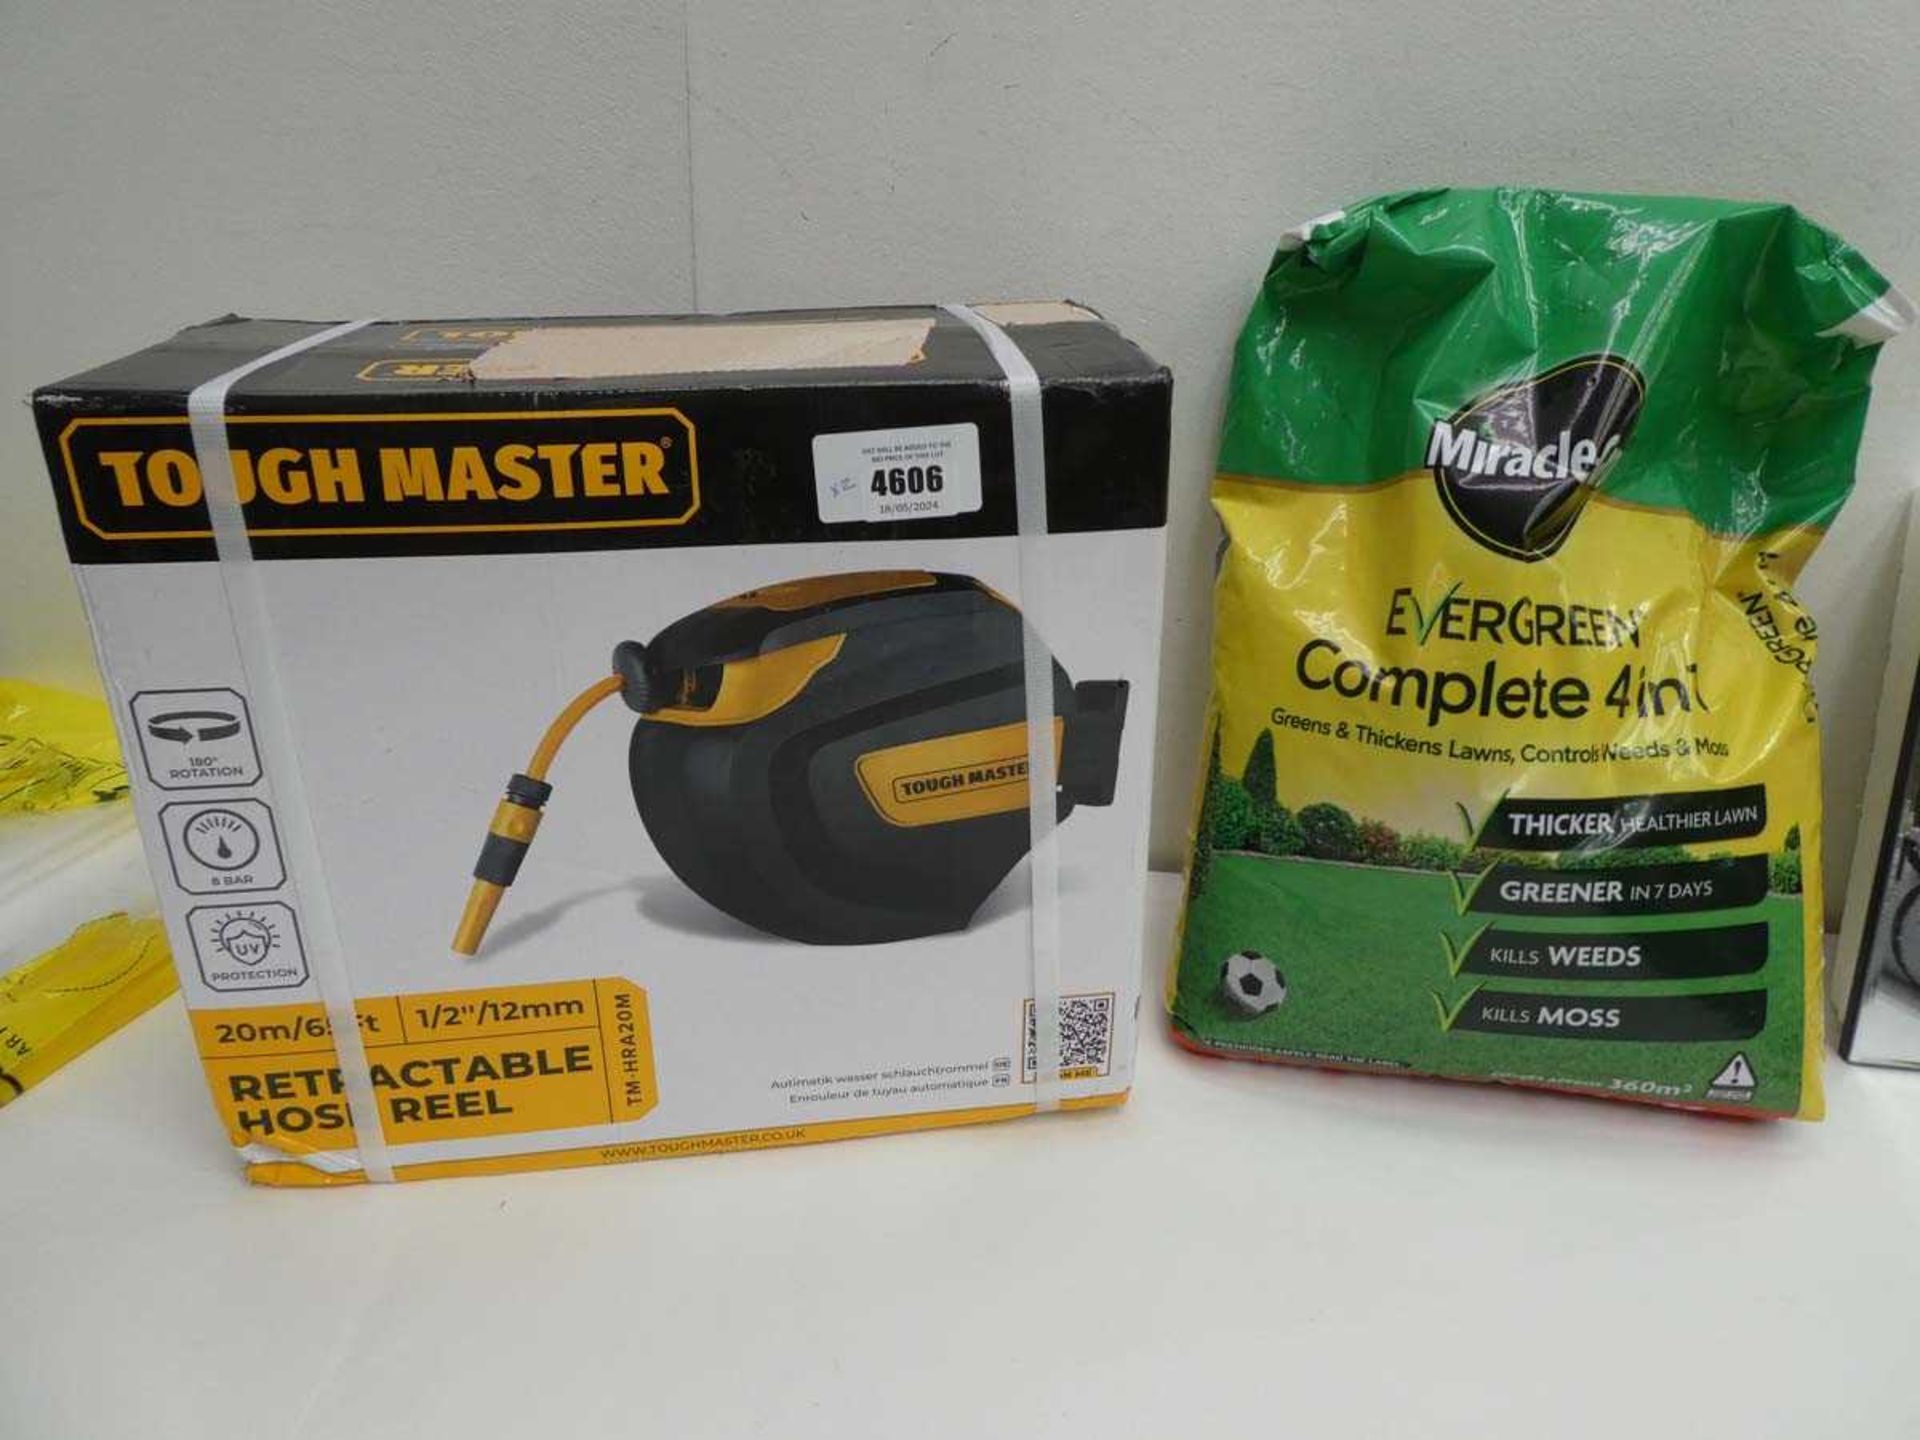 +VAT Tought Master 20m retractable hose reel and 12.6kg bag of Miracle Grro Evergreen complete 4